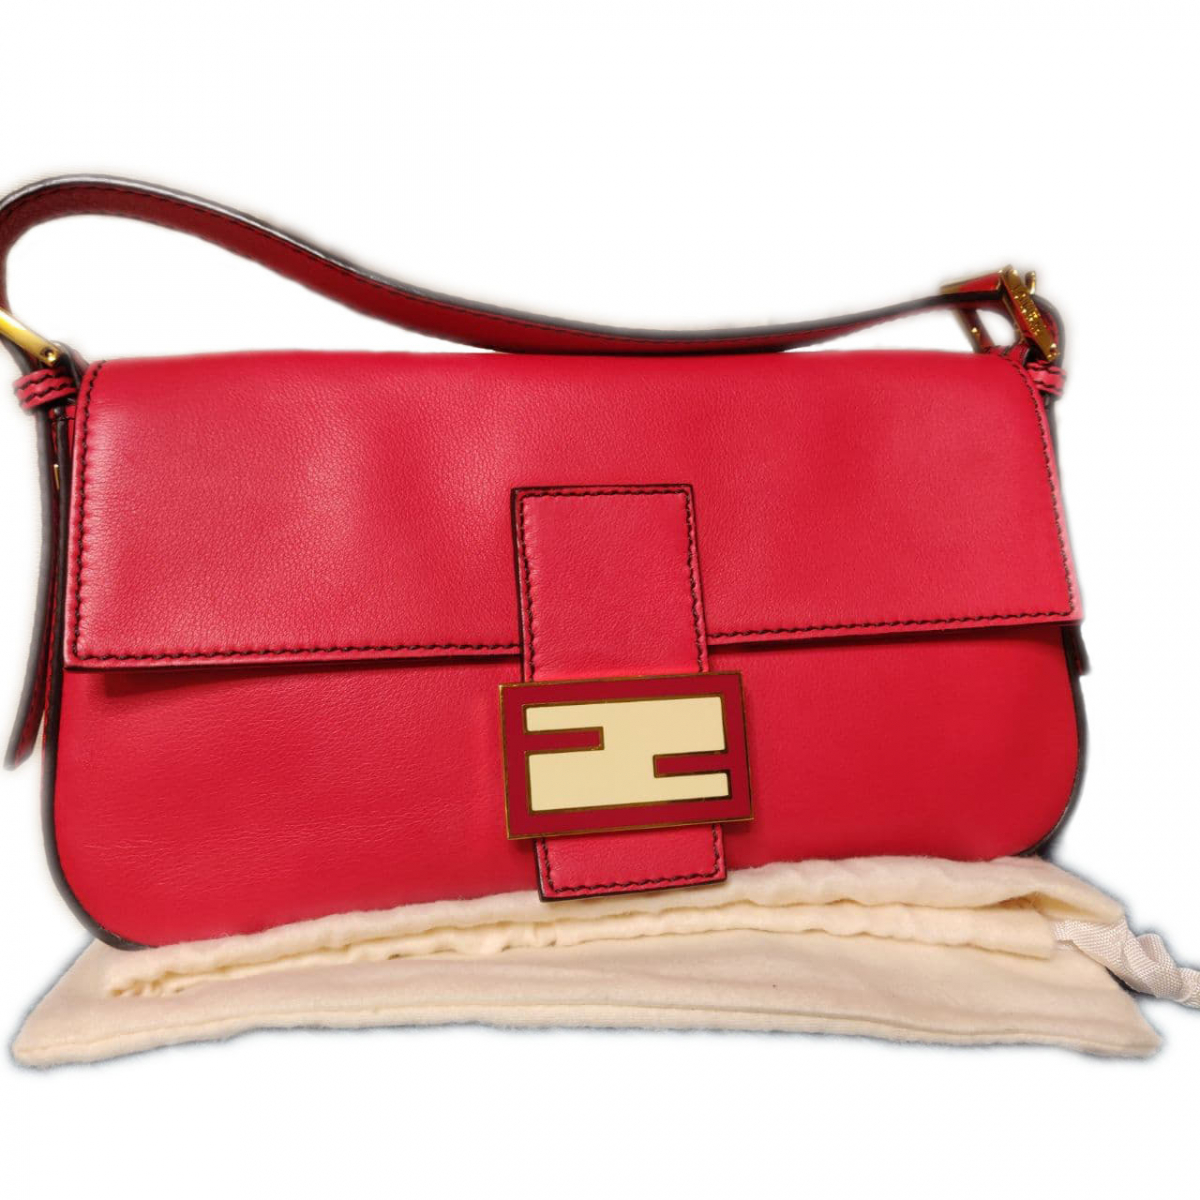 Fendi Red Leather Baguette Bag pre-owned